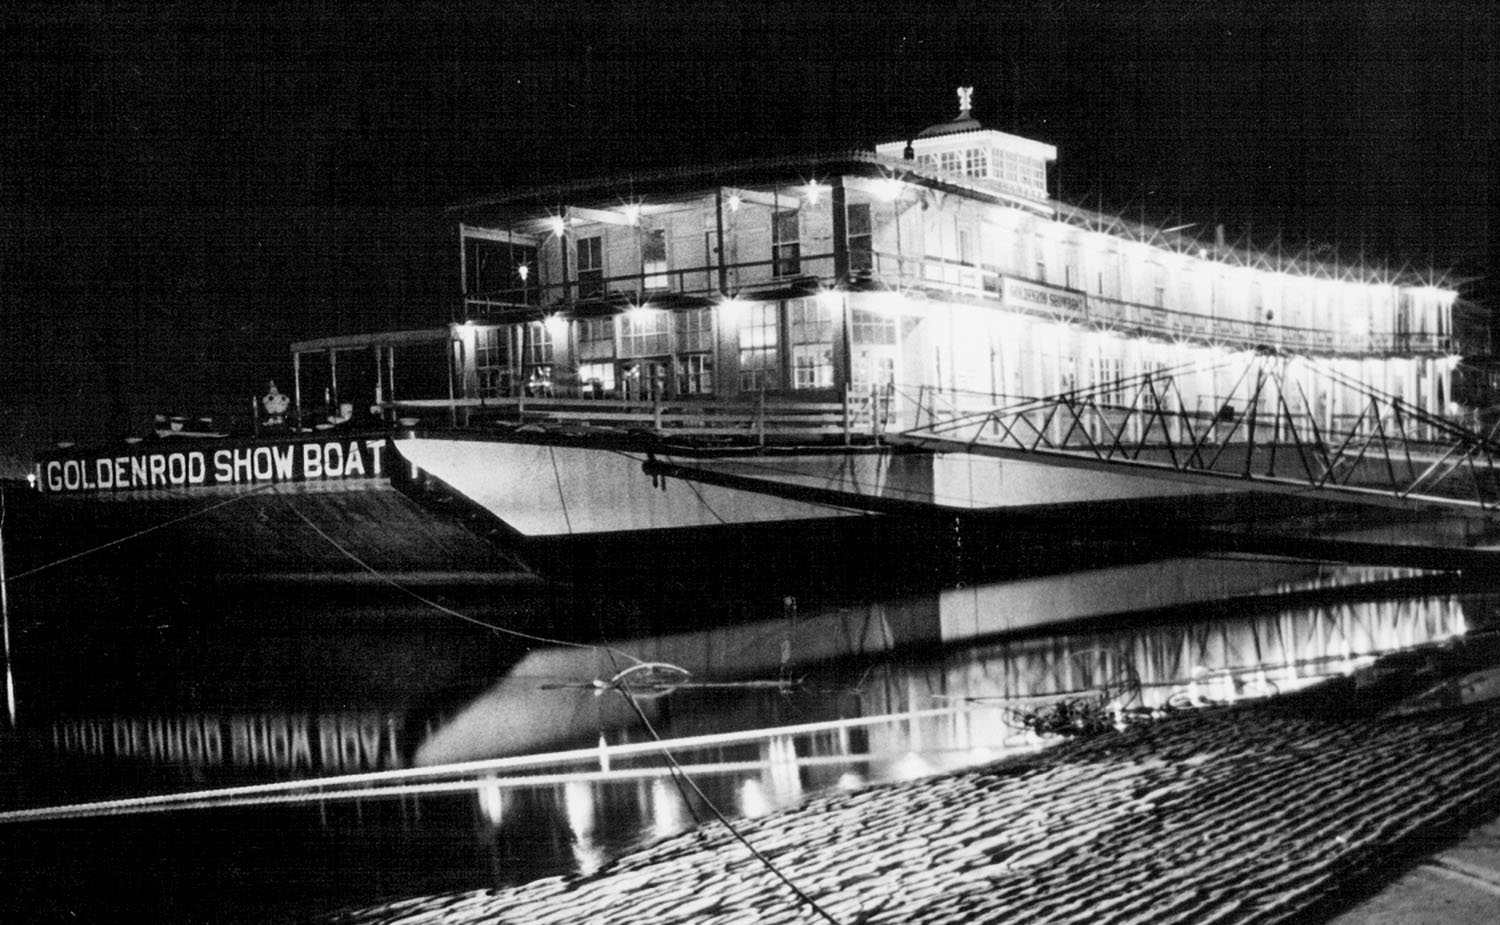 Restored after a fire, the Goldenrod Showboat lights up the levee in 1968 at St. Louis. (Keith Norrington collection)